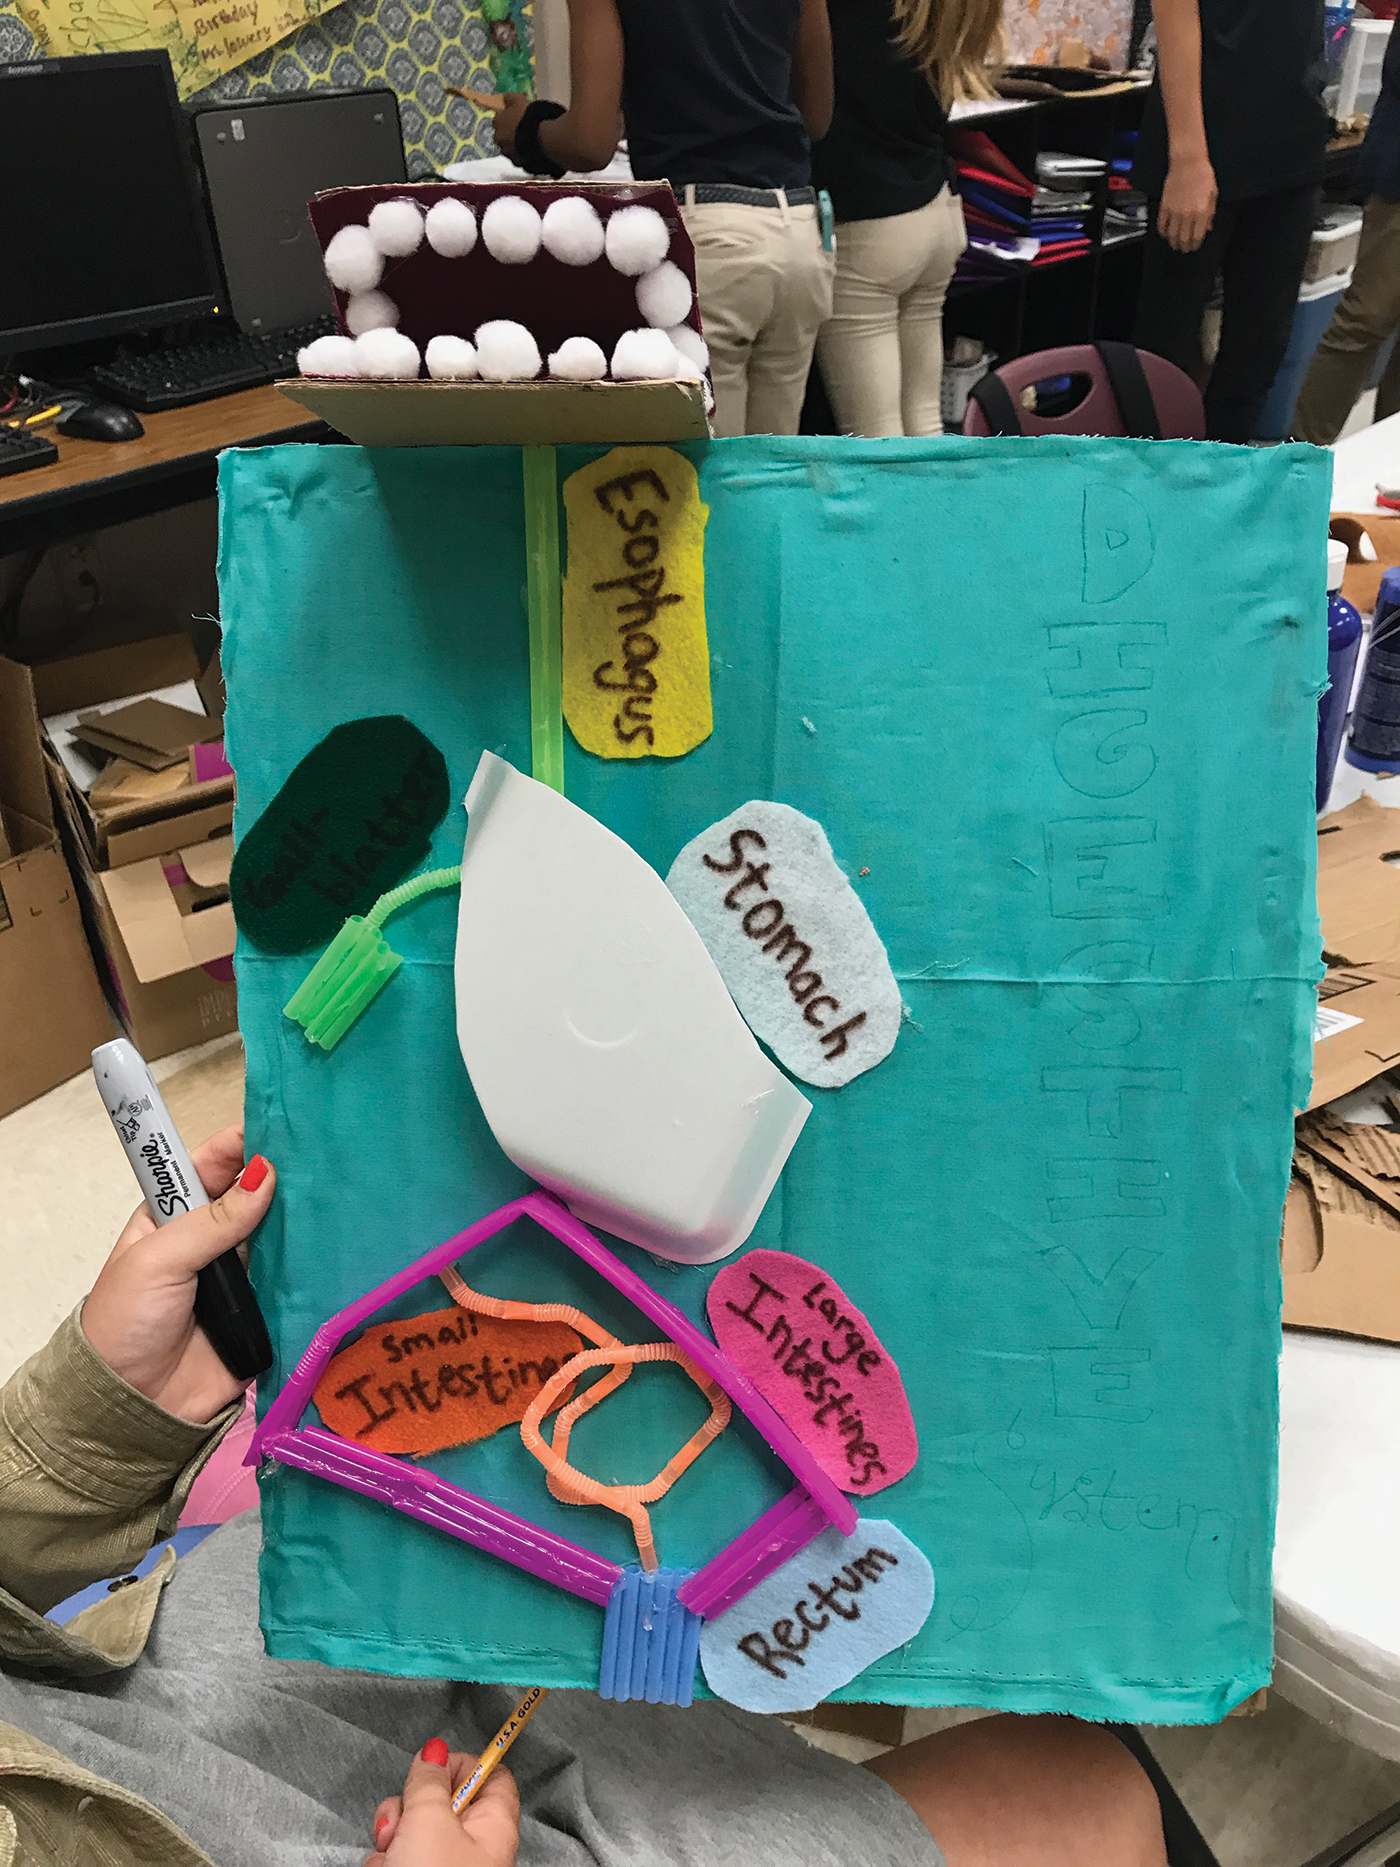 Student model of the digestive system